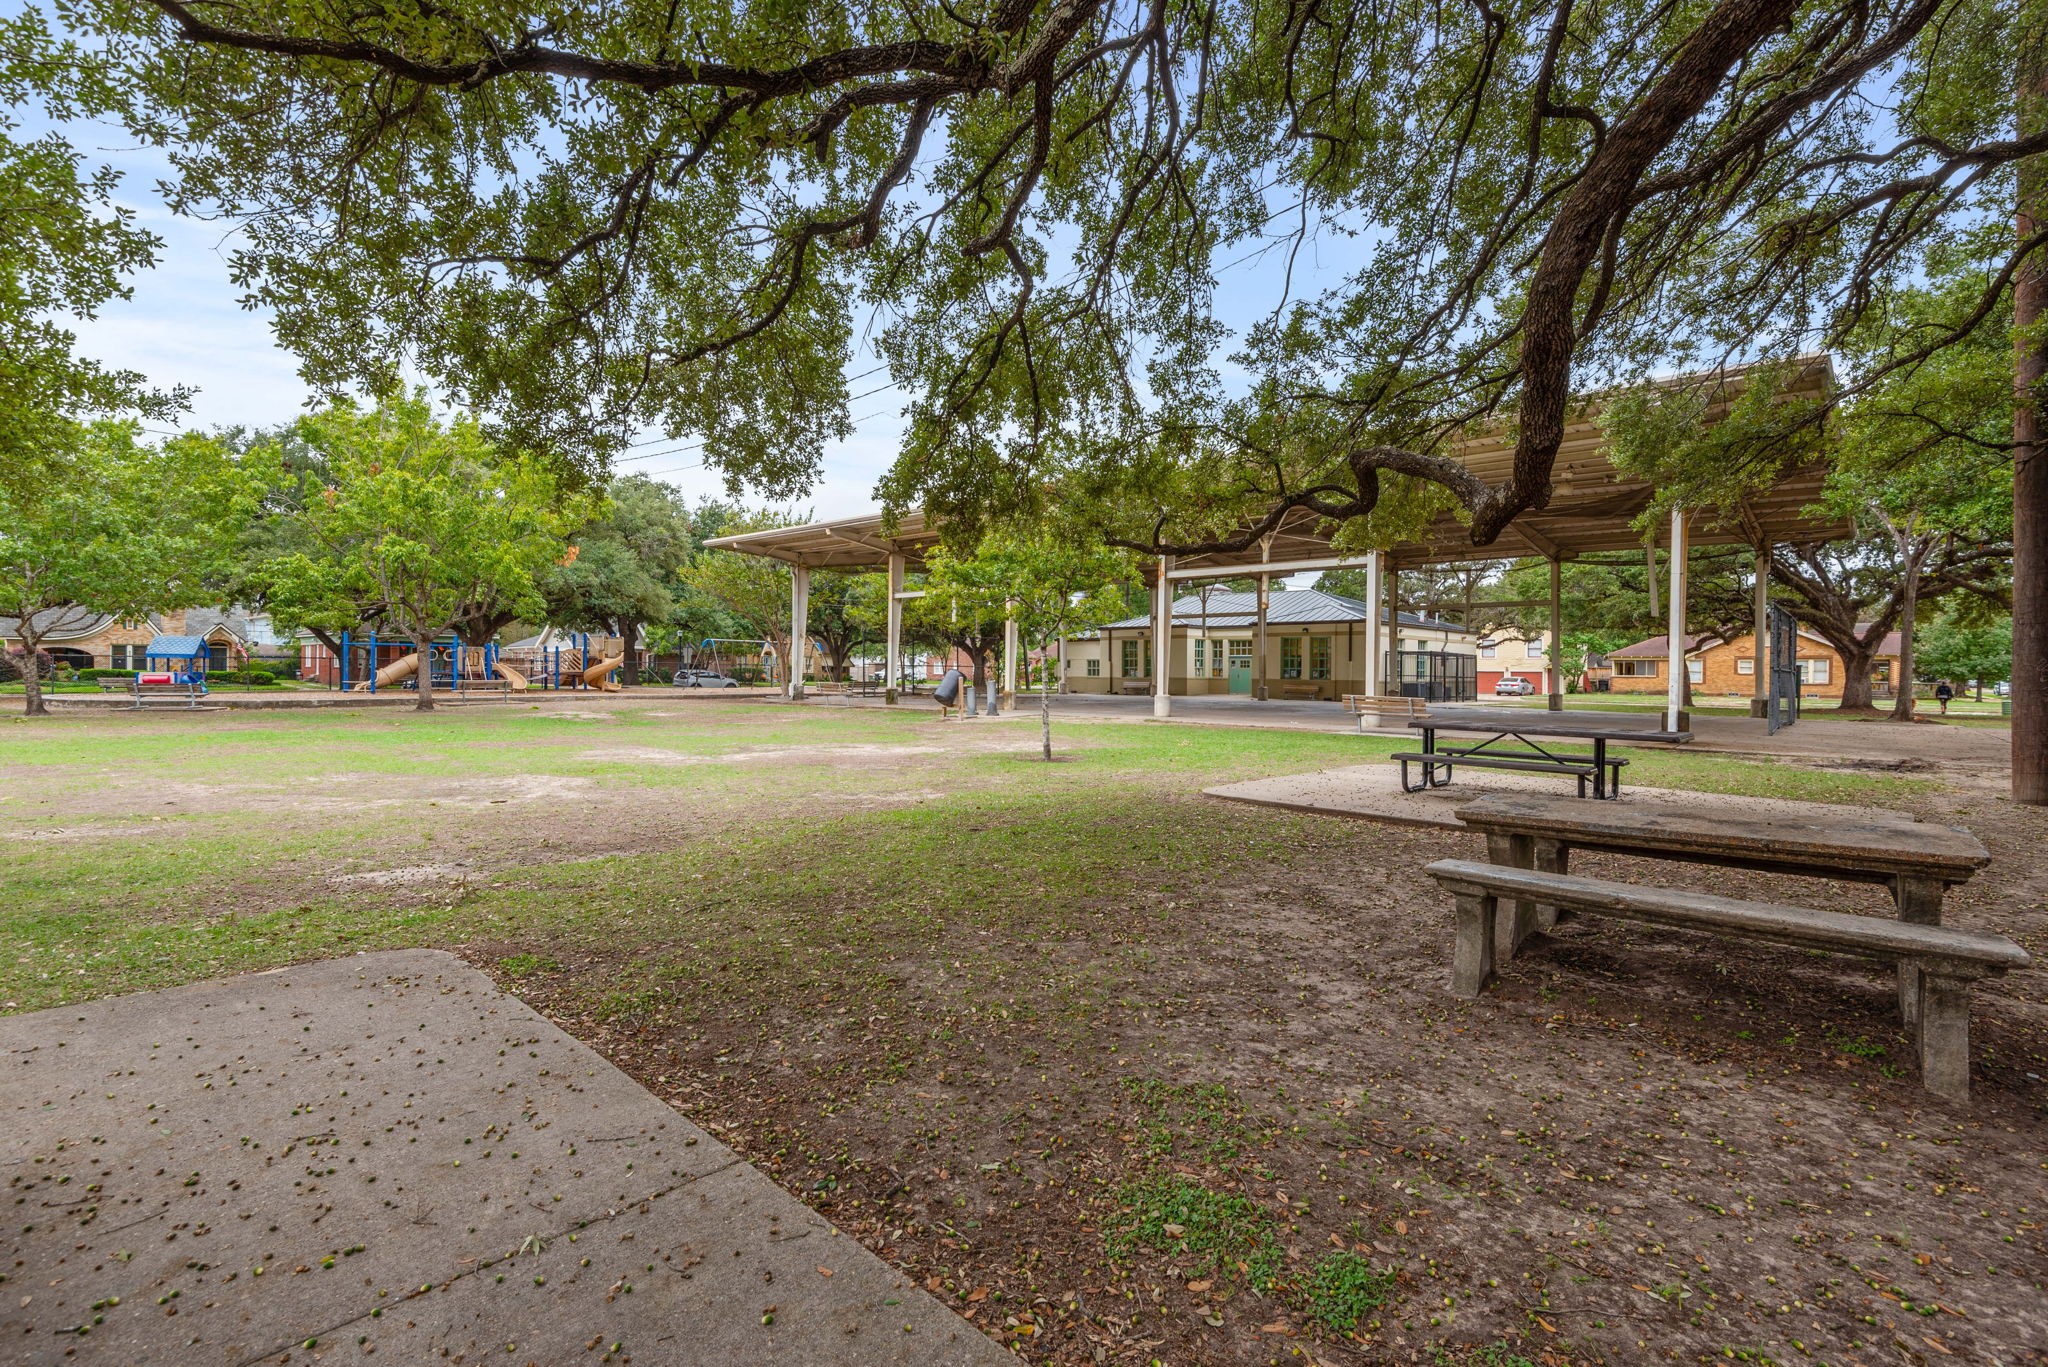 Proctor Plaza park, sitting directly across the street from the home is a Norhill staple and includes a large covered pavilion, benches, beautiful trees, and so much more!